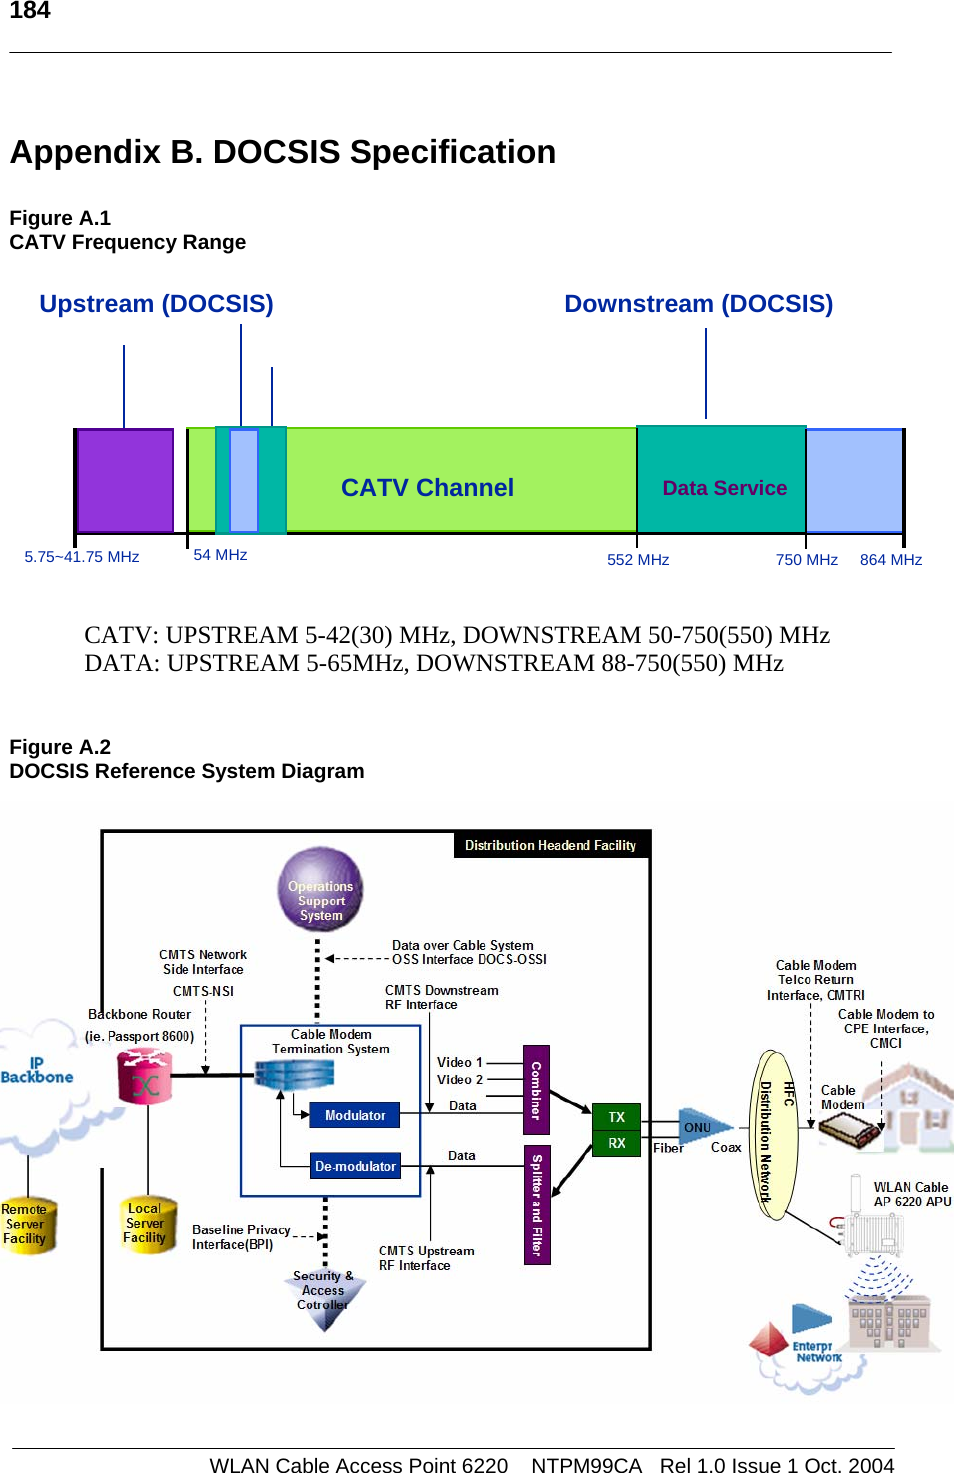   184   Appendix B. DOCSIS Specification  Figure A.1 CATV Frequency Range  Upstream (DOCSIS) Downstream (DOCSIS)  CATV: UPSTREAM 5-42(30) MHz, DOWNSTREAM 50-750(550) MHz             DATA: UPSTREAM 5-65MHz, DOWNSTREAM 88-750(550) MHz   Figure A.2 DOCSIS Reference System Diagram   54 MHz  750 MHz CATV Channel  DataService5.75~41.75 MHz  552 MHz  864 MHz WLAN Cable Access Point 6220    NTPM99CA   Rel 1.0 Issue 1 Oct. 2004